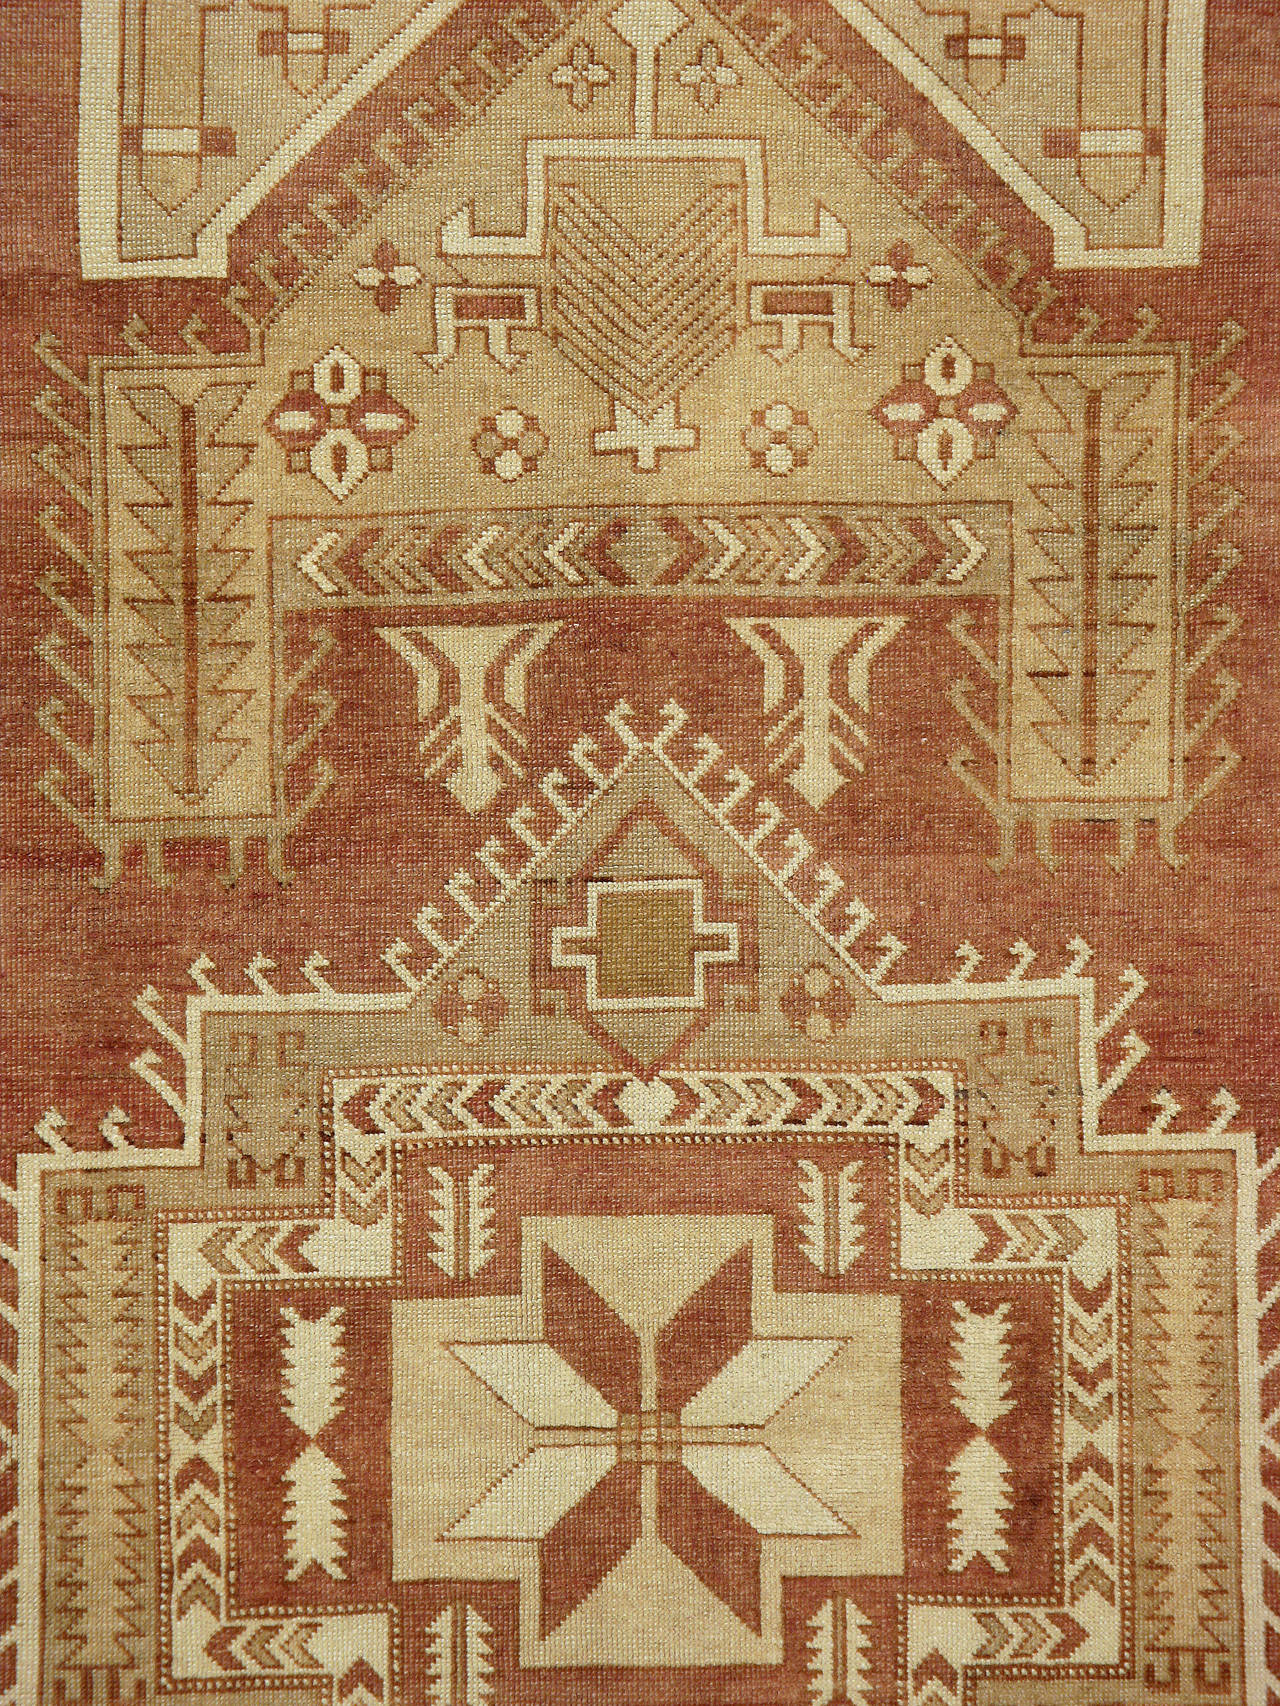 A vintage Turkish Anatolian carpet from the mid-20th century with a traditional medallion design over a terracotta field.